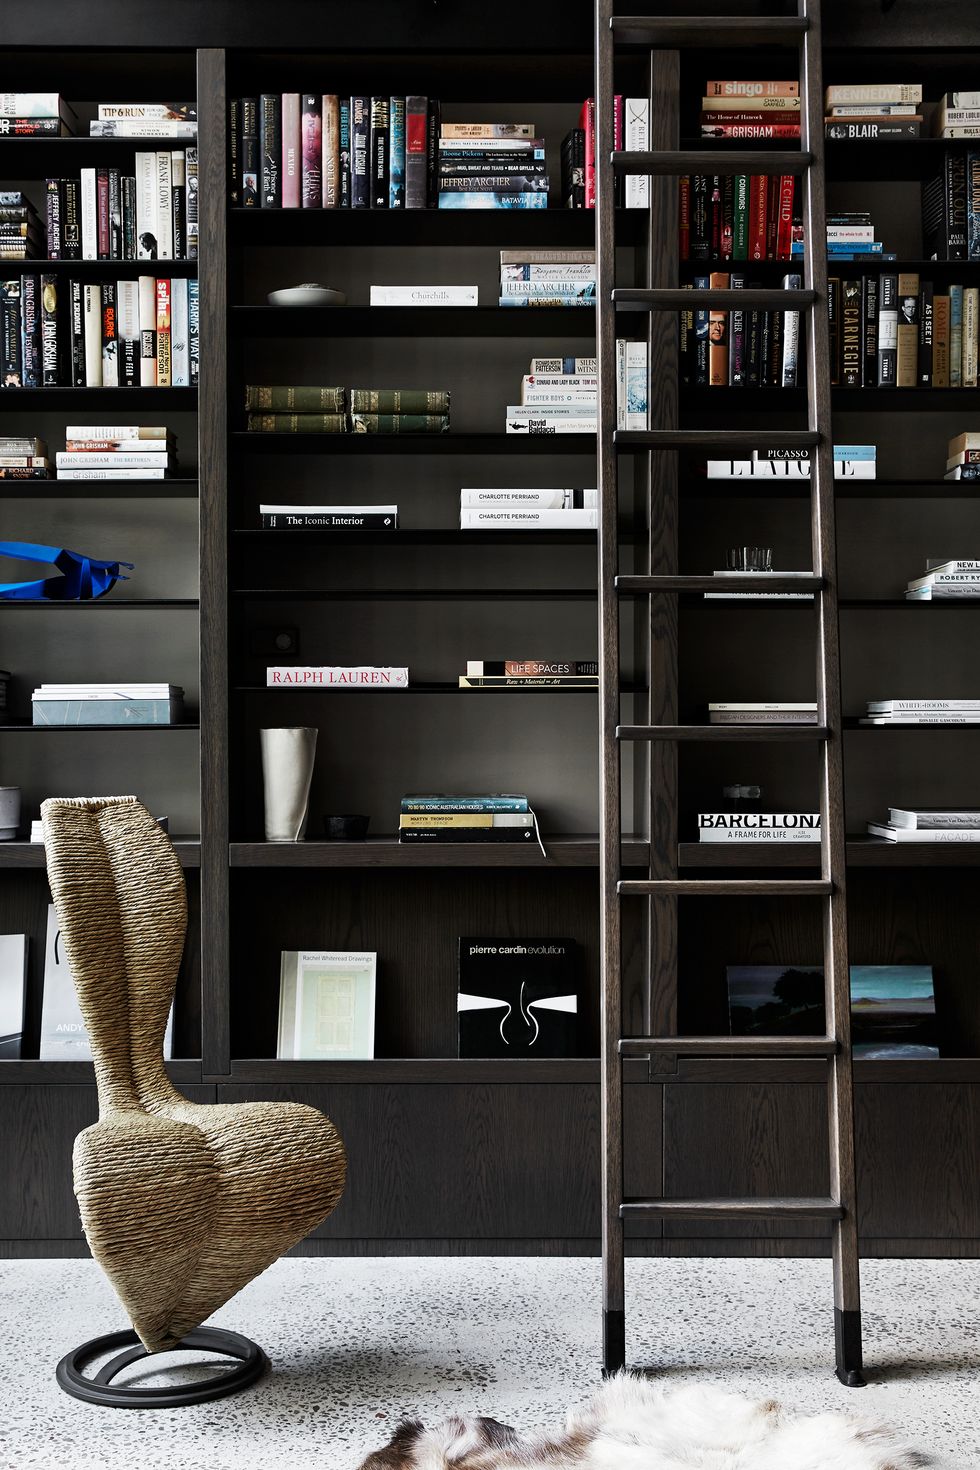 17 Gorgeous Rooms With Built-In Bookcases